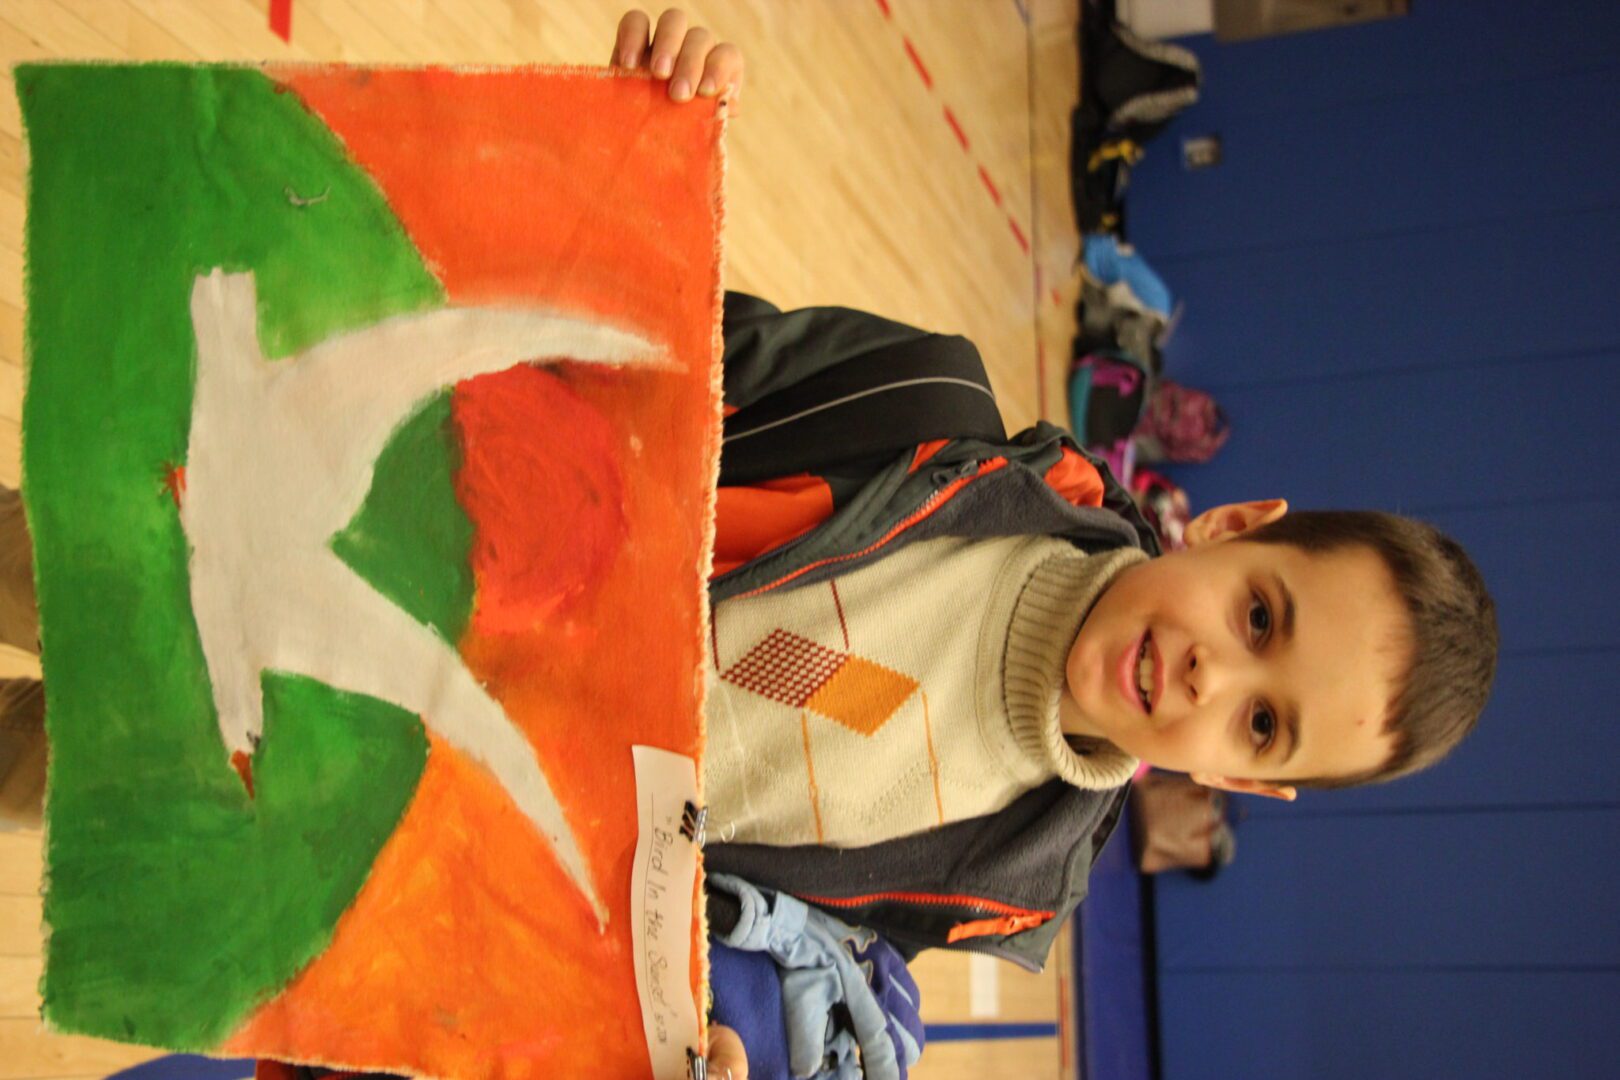 A young boy holding up a flag.